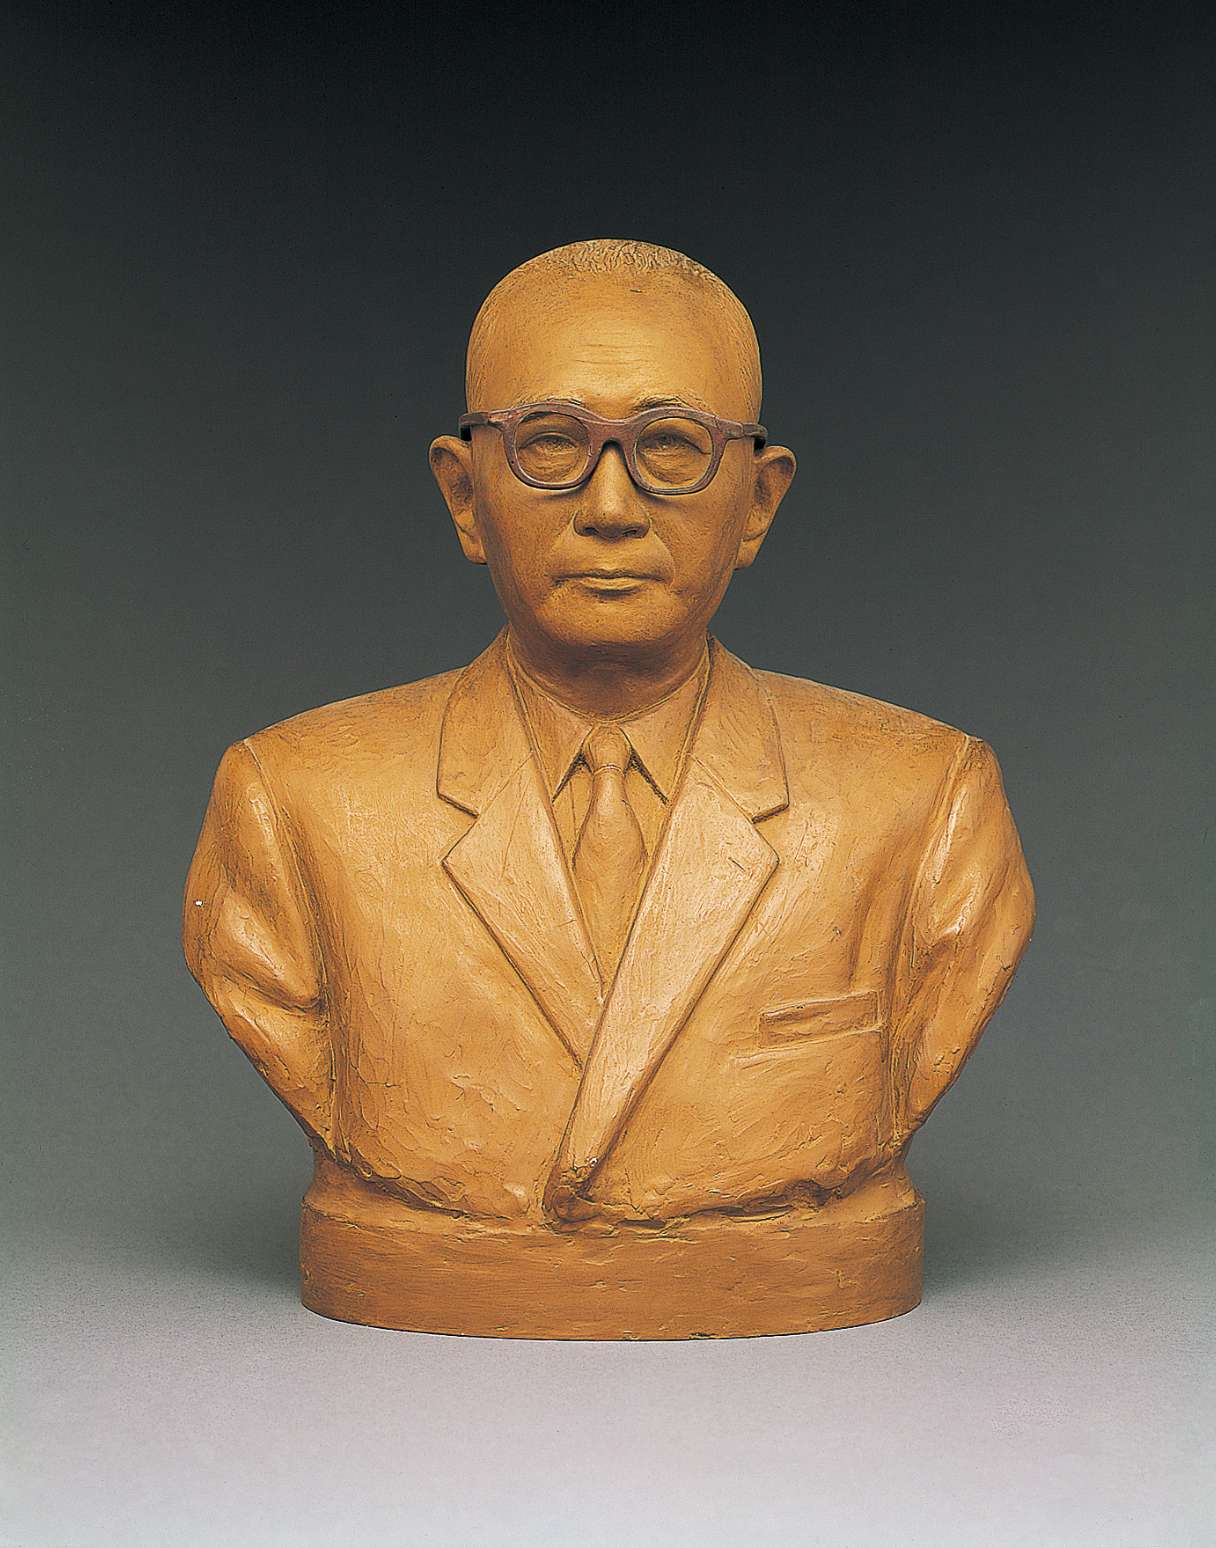 A beige hued bust of a spectacled, middle-aged Japanese man wearing a suit and tie, his face shows a kindly gaze with a determined expression.